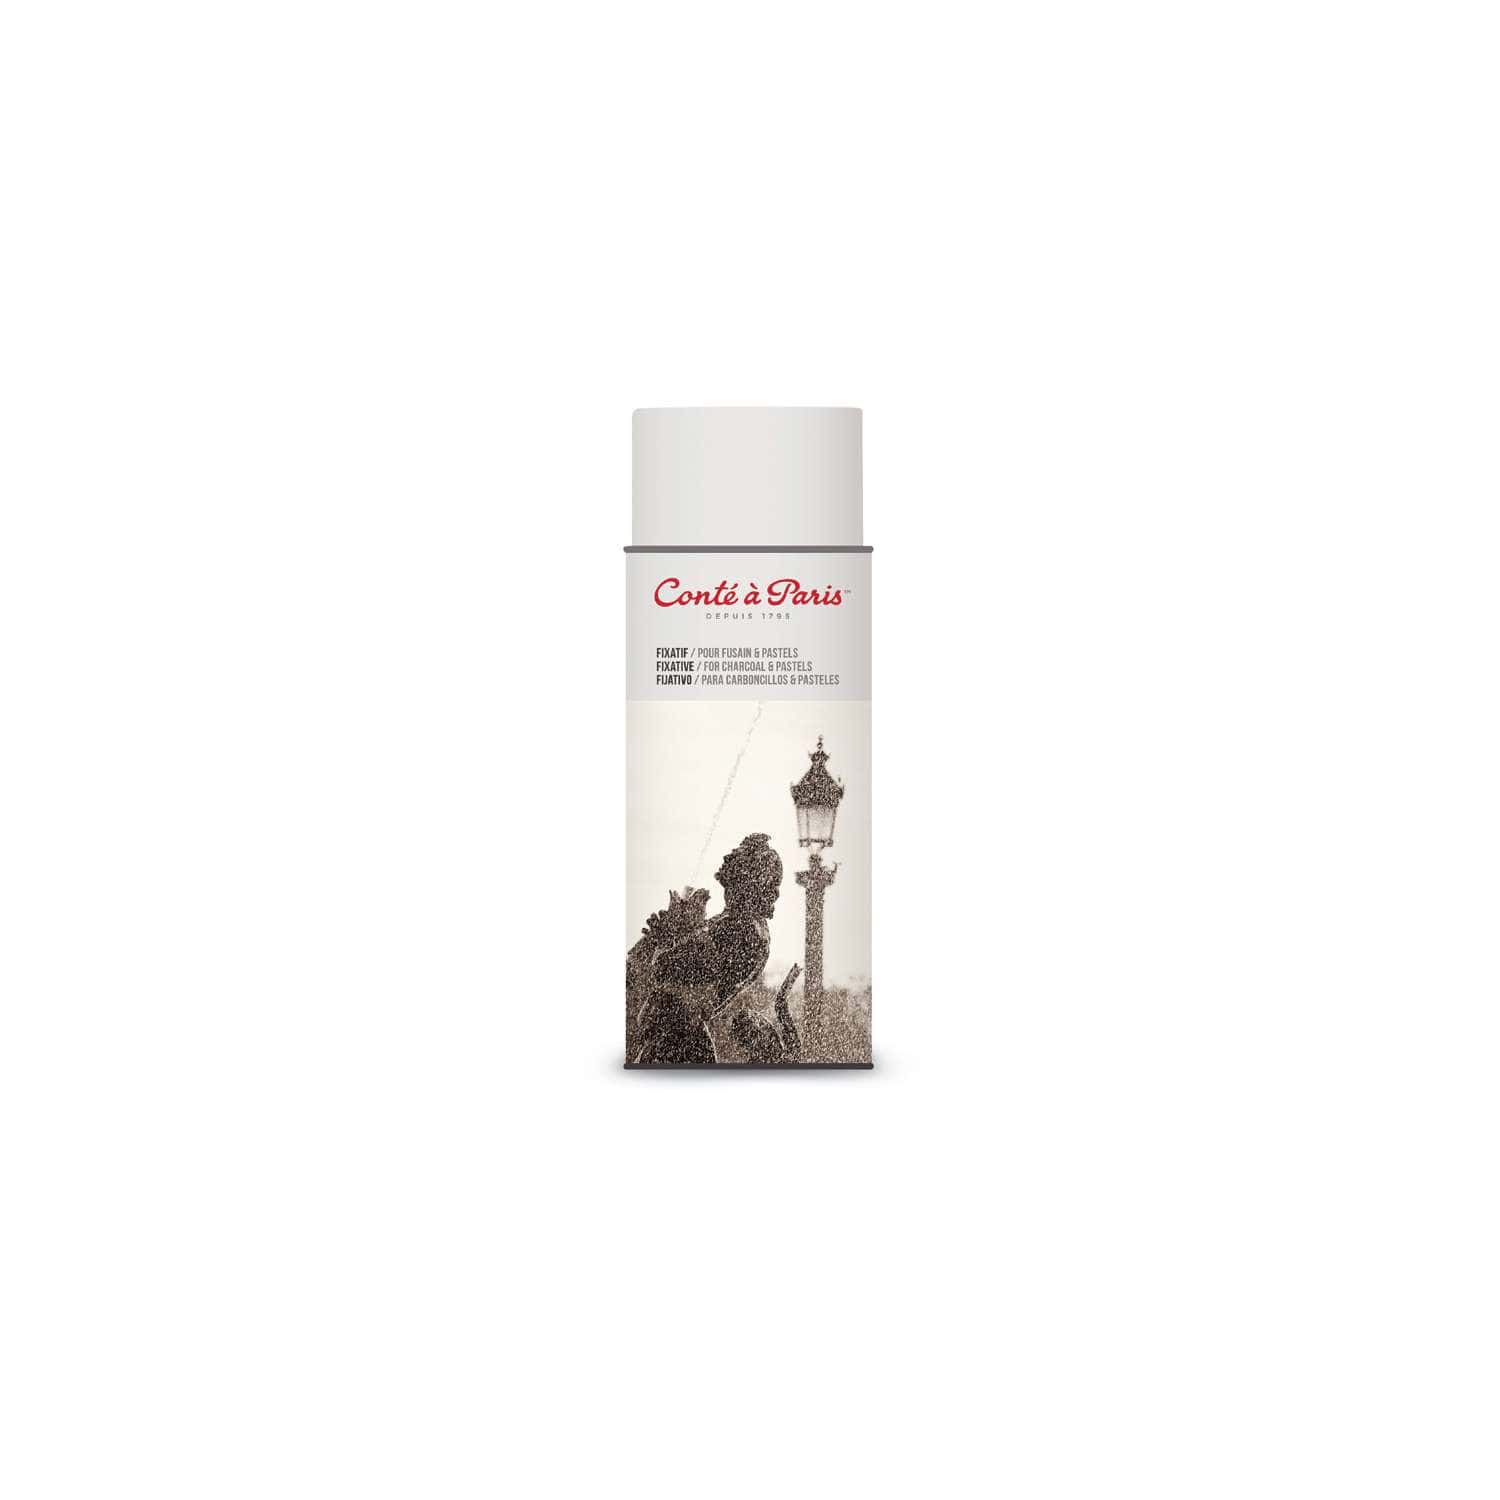 Conte a Paris Charcoal and Pastel Fixative Spray